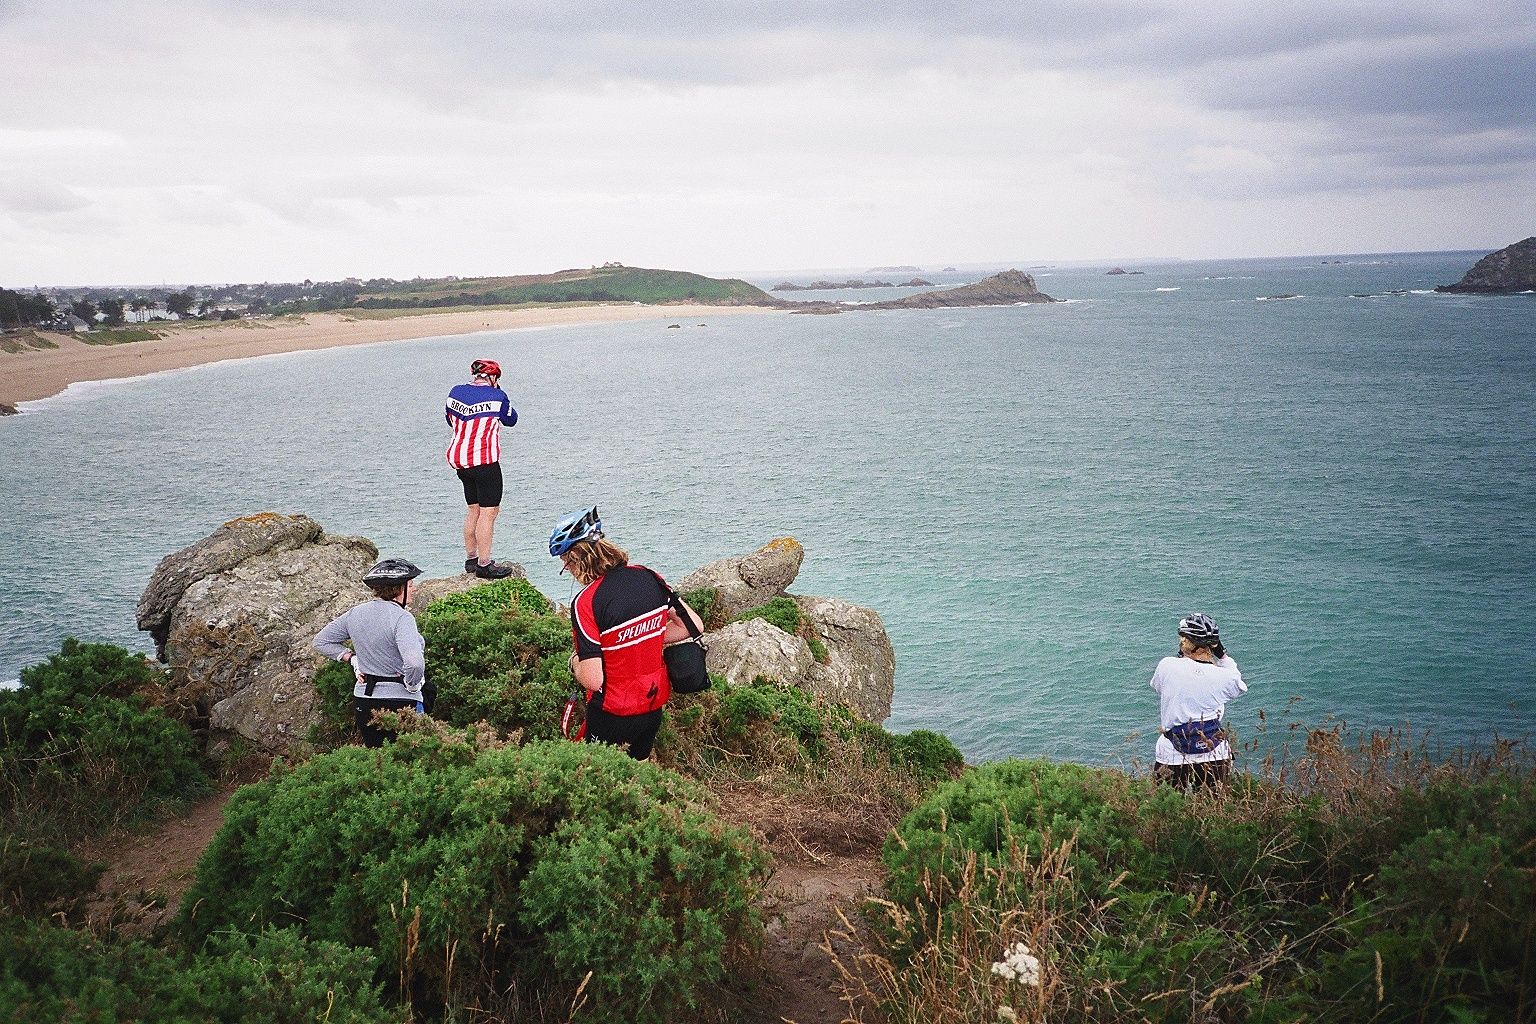 Cyclomundo riders looking upon one of Normandy's historic beaches